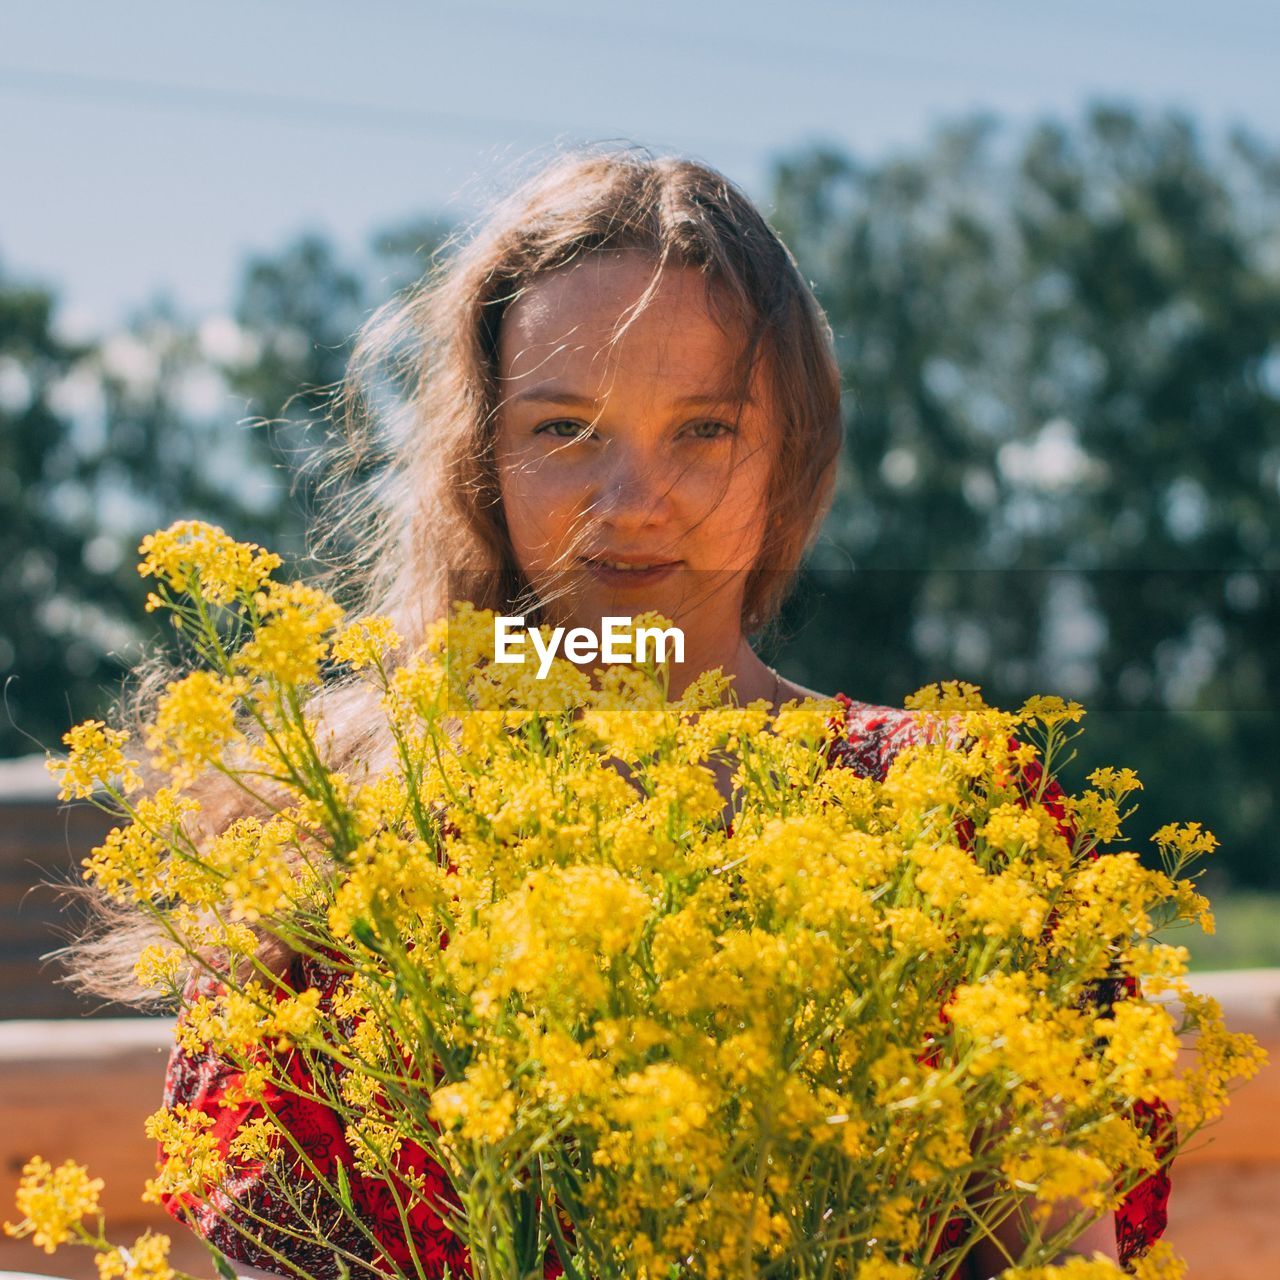 Portrait of young woman with yellow flowers against blurred background